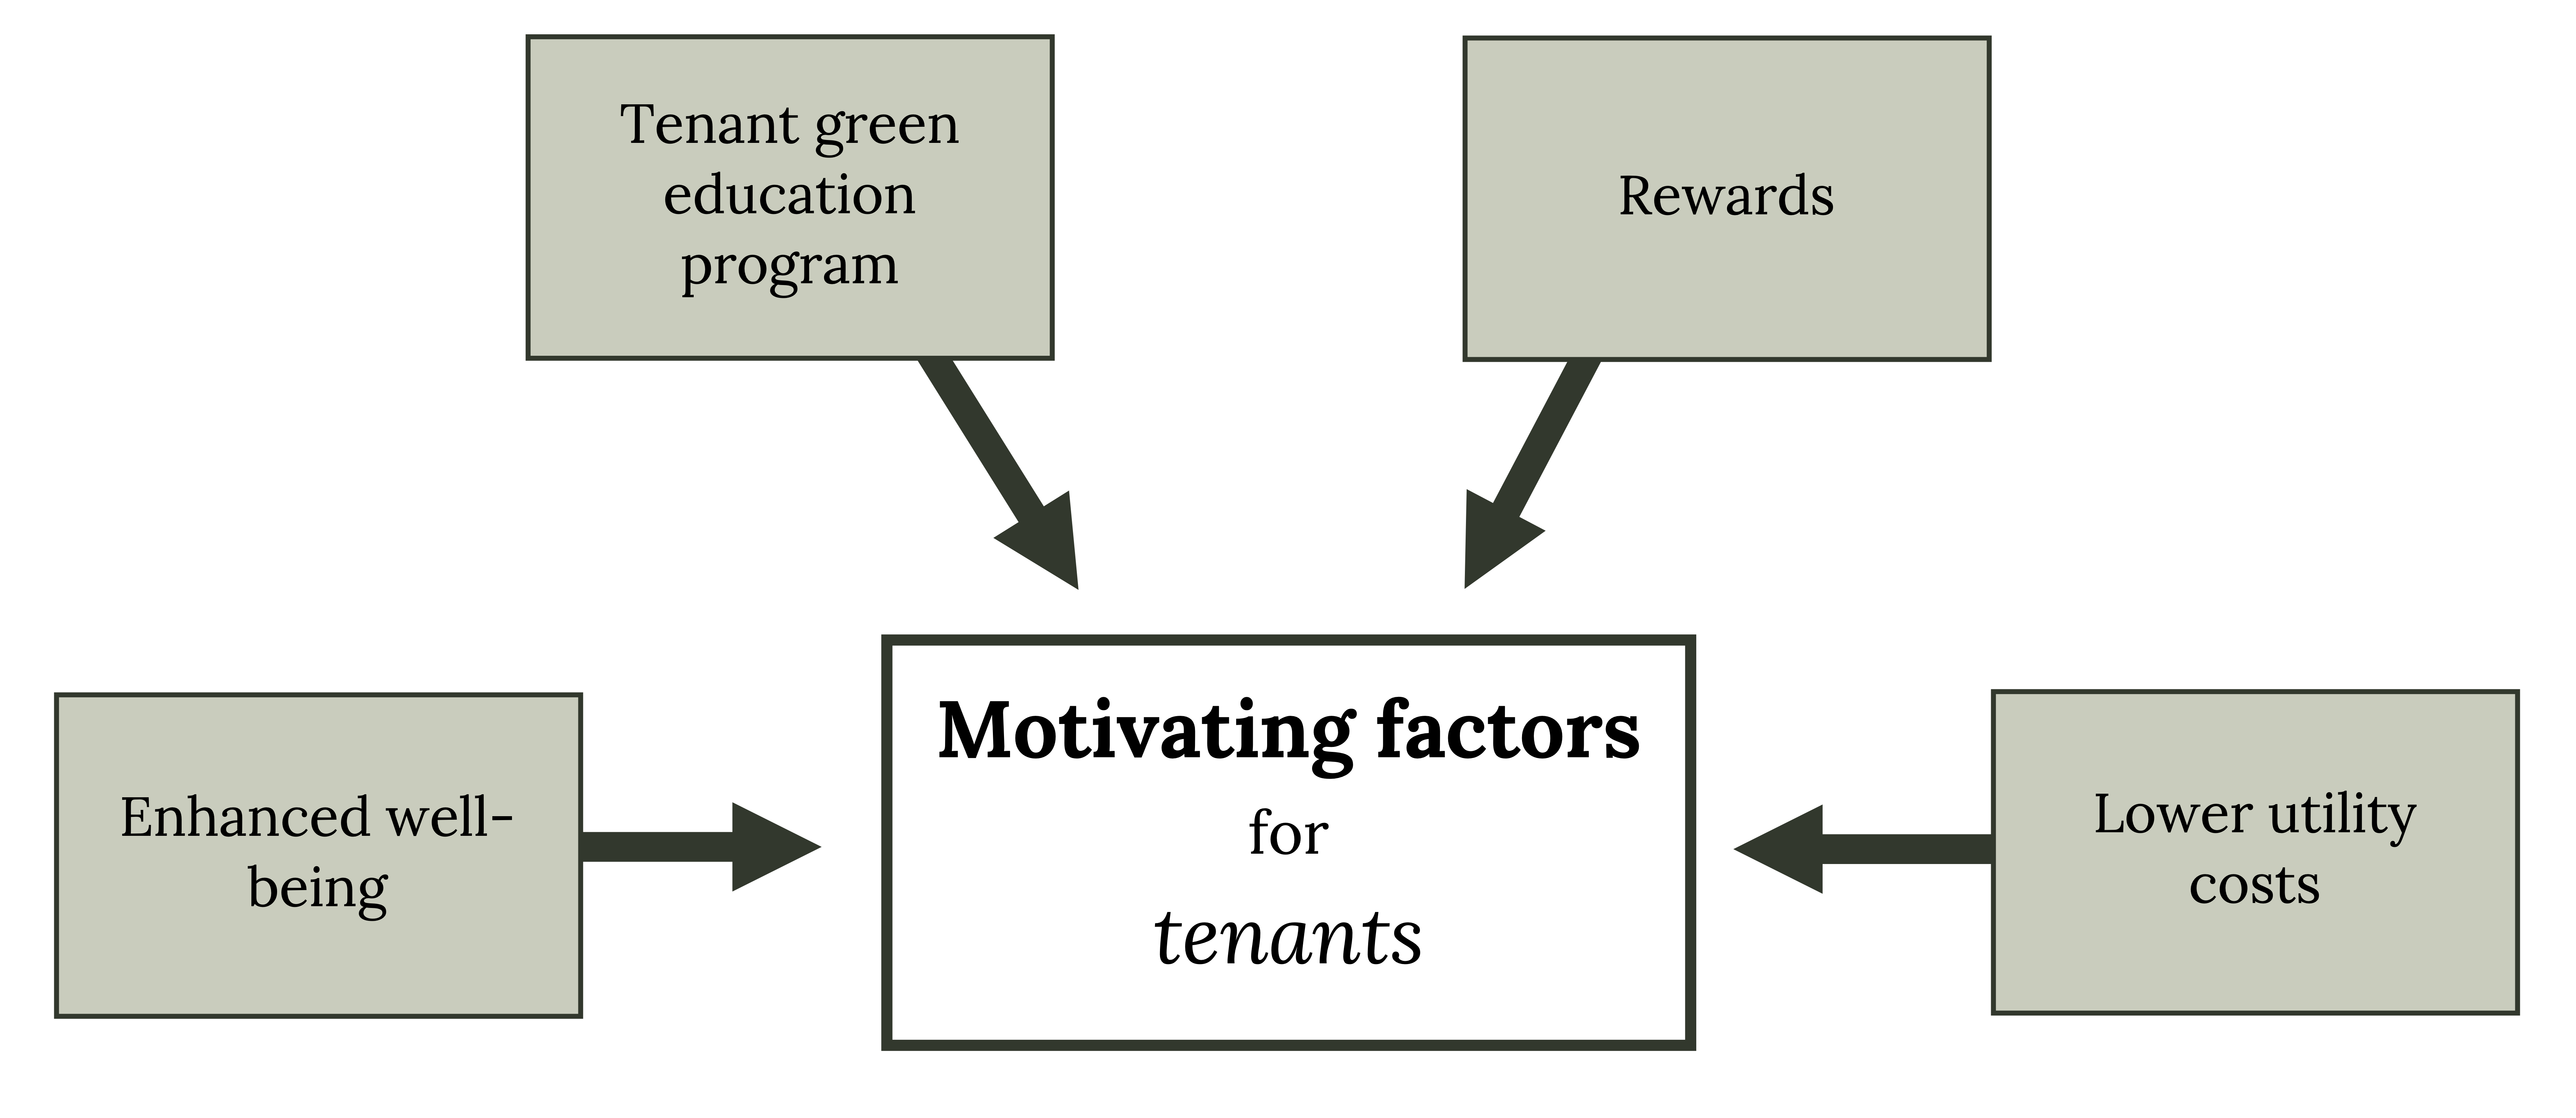 Motivating factors for tenants: Enhanced well-being, tenant green education program, rewards, lower utility costs.